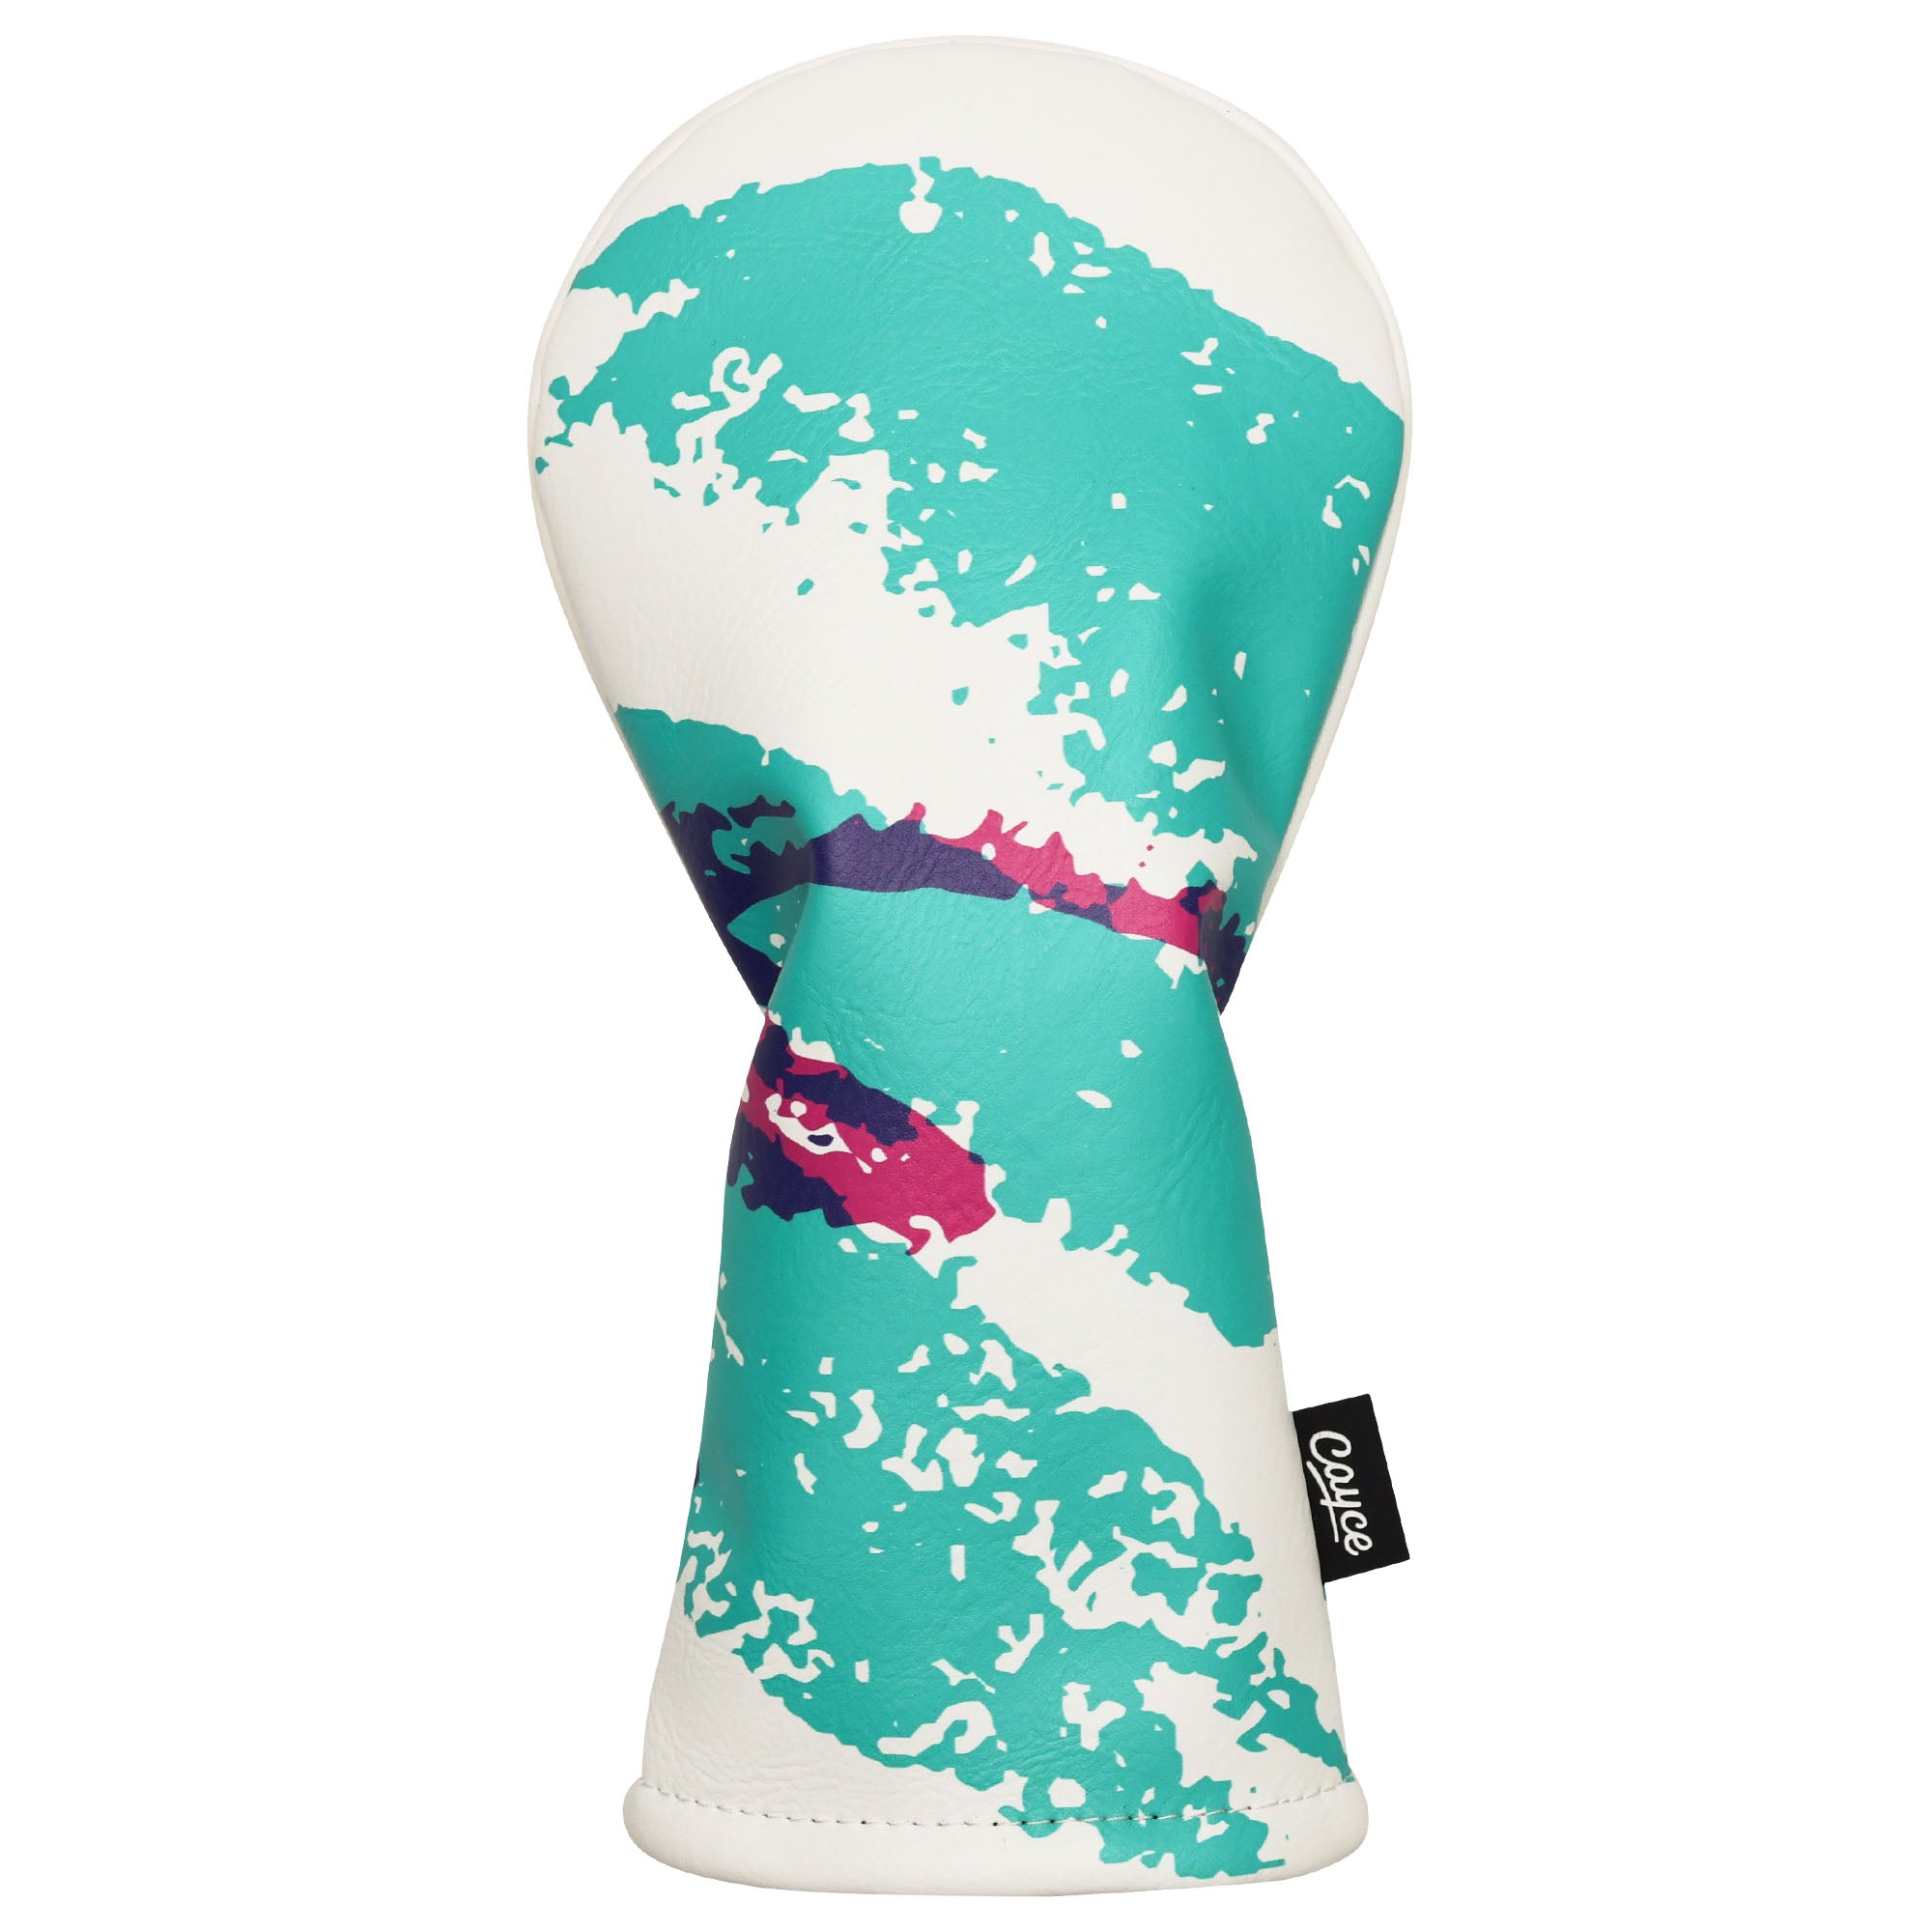 hybrid headcover with bright, 90s jazz cup themed design